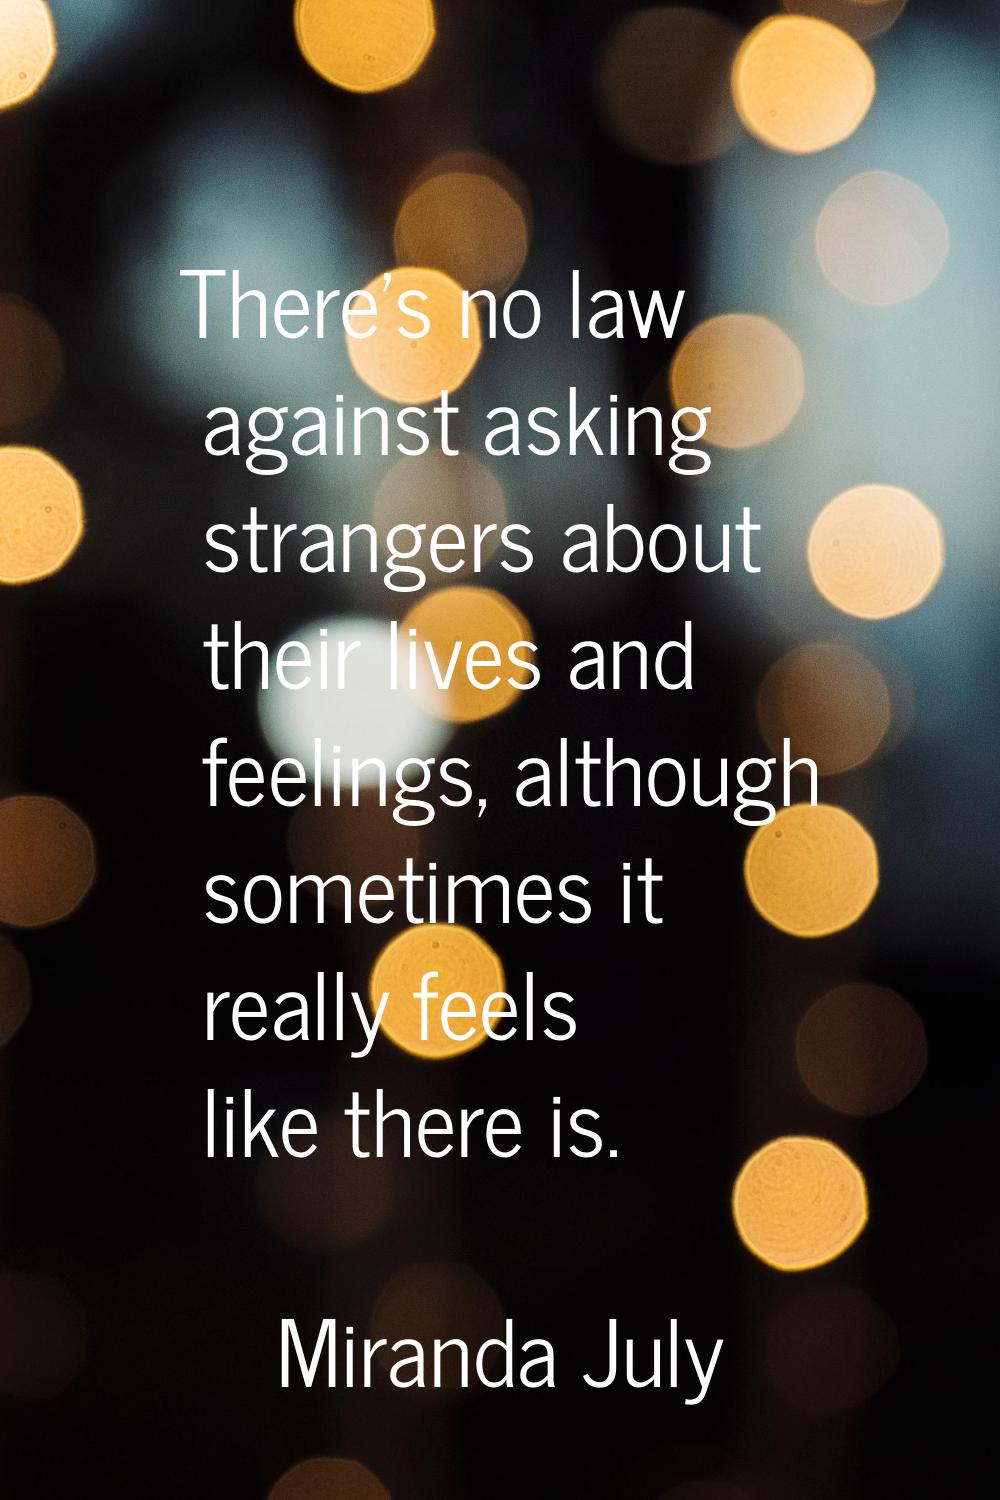 There's no law against asking strangers about their lives and feelings, although sometimes it reall